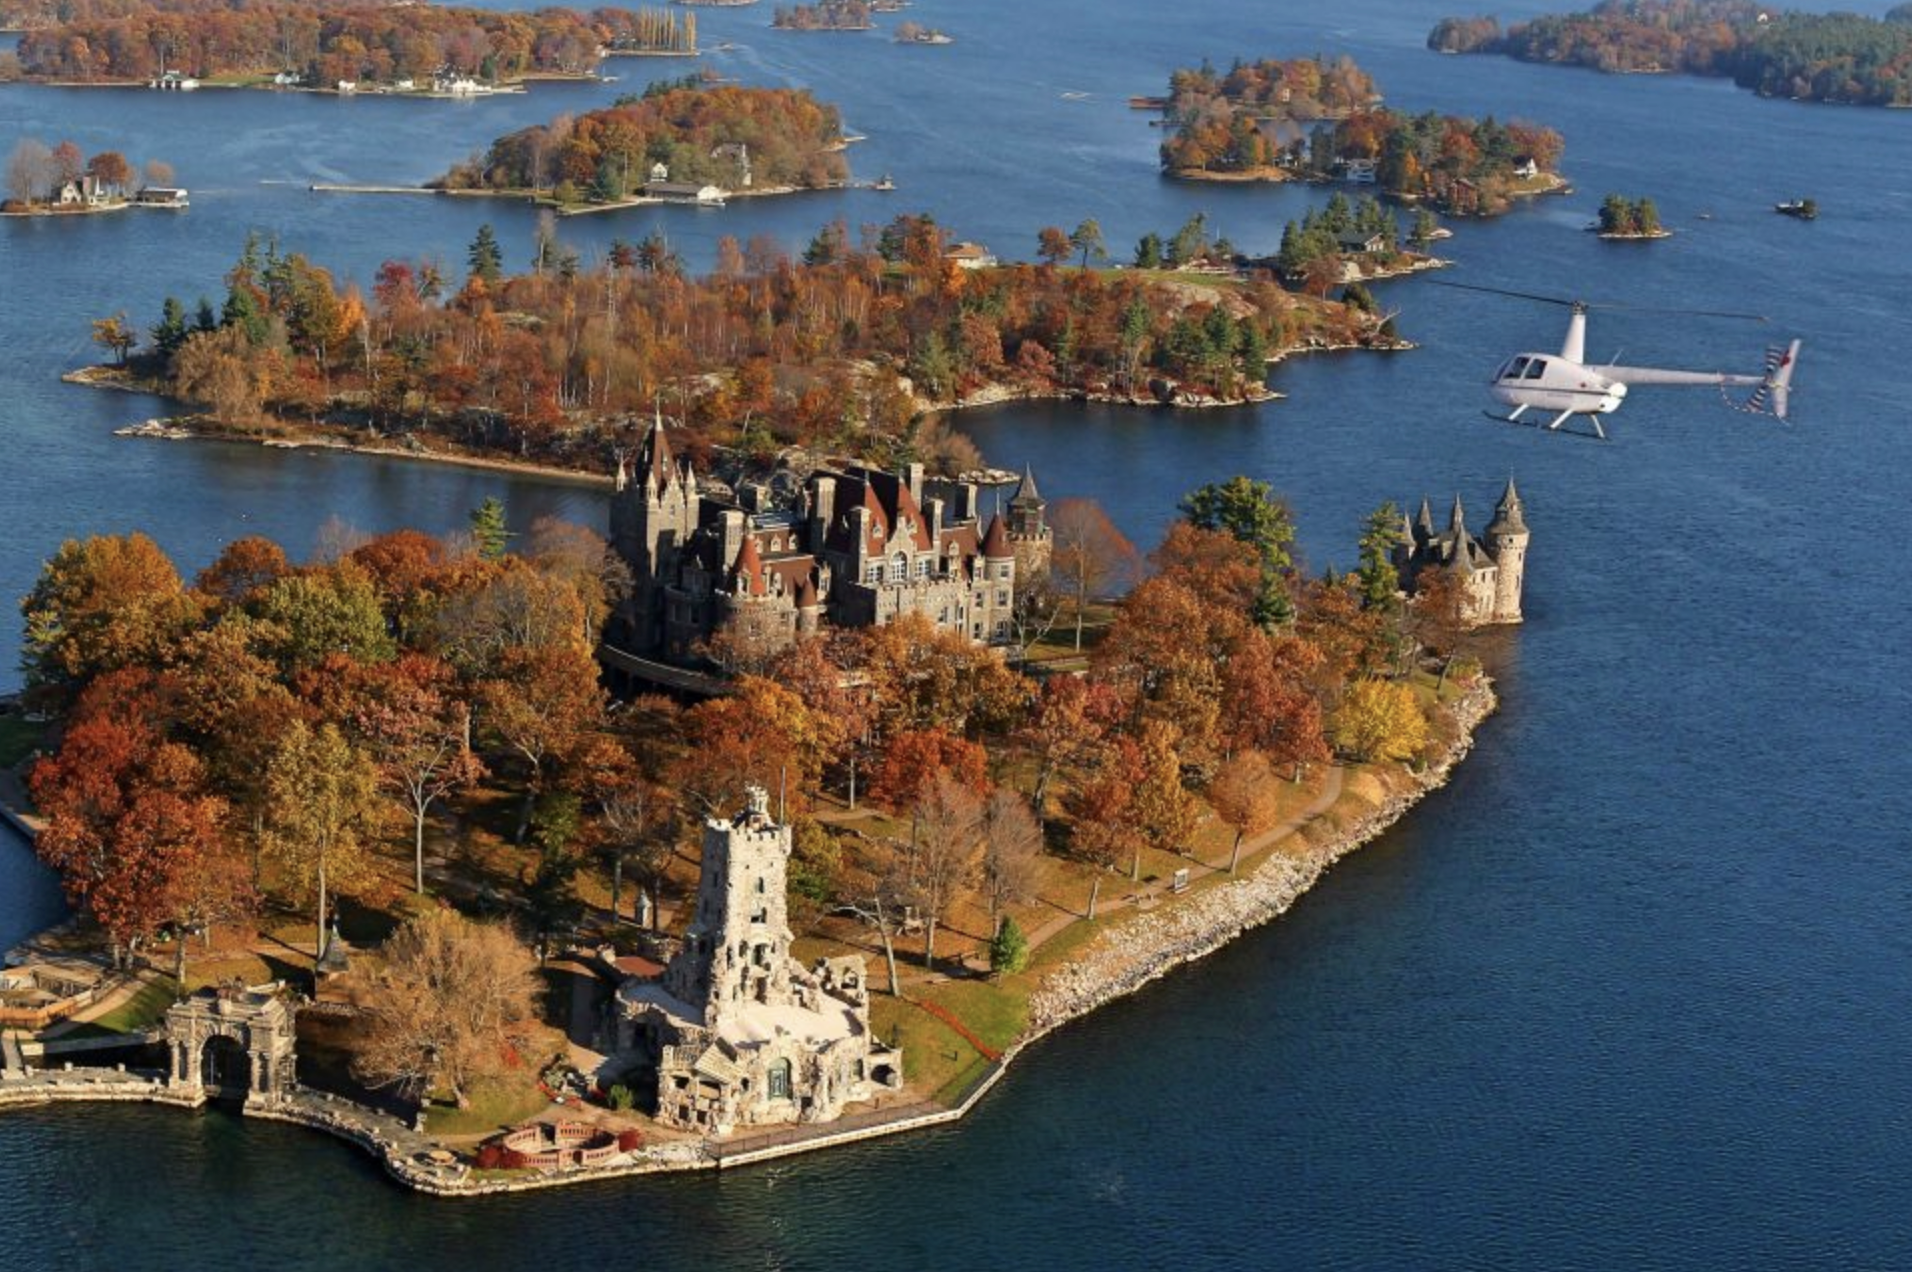 4. Thousand Islands Helicopter Tour with Cider Mill and Lunch